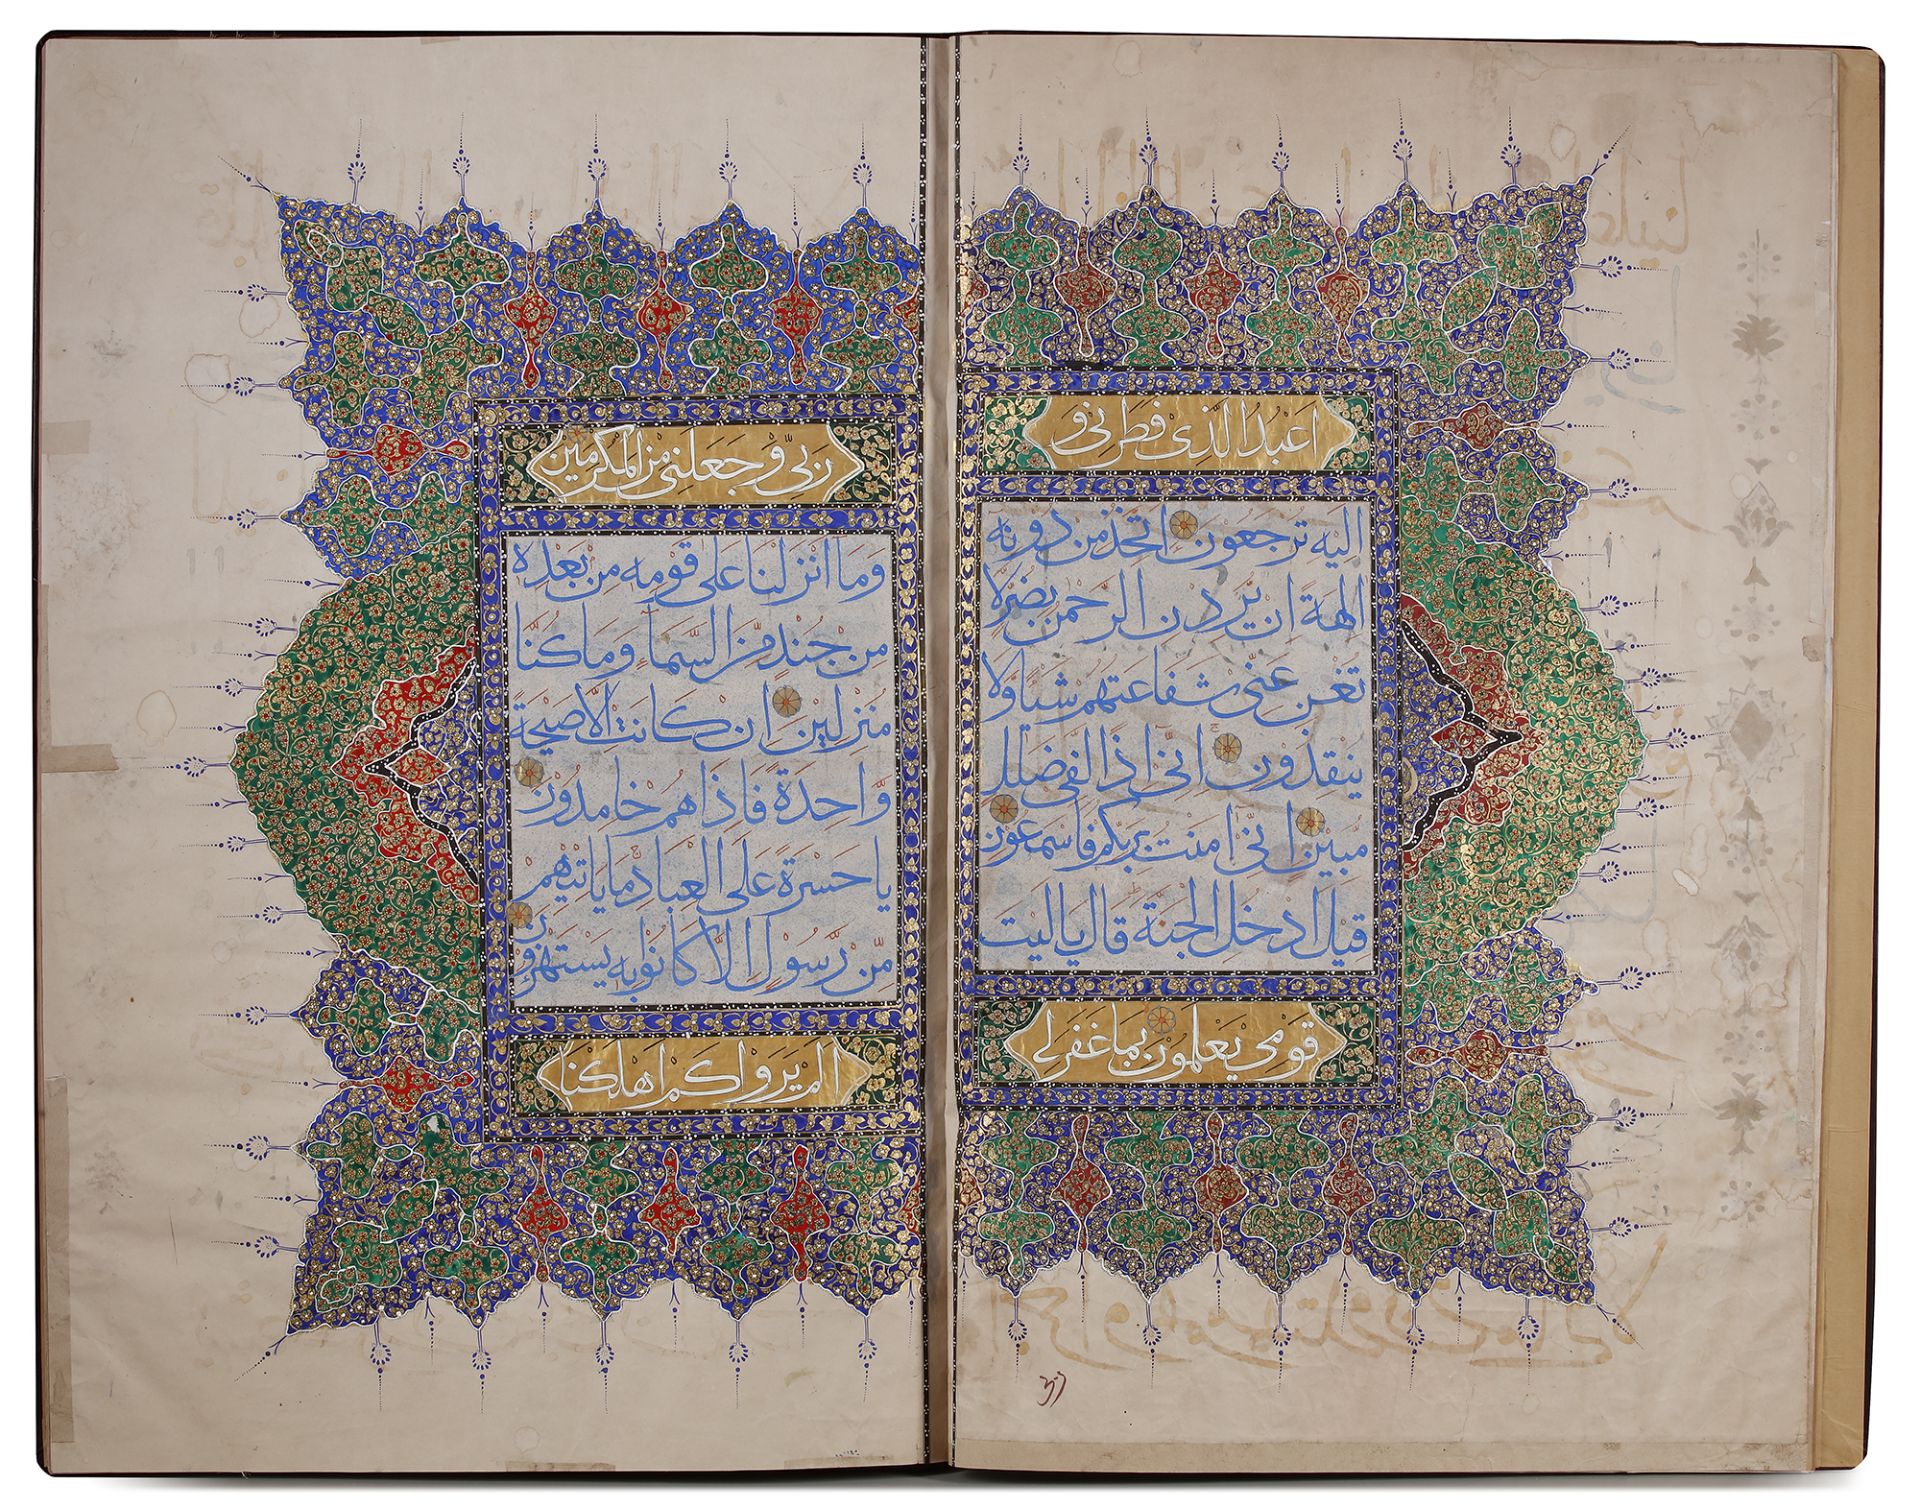 A LARGE OF QURAN SECTION, INDIA, LATE 19TH CENTURY - Image 8 of 13